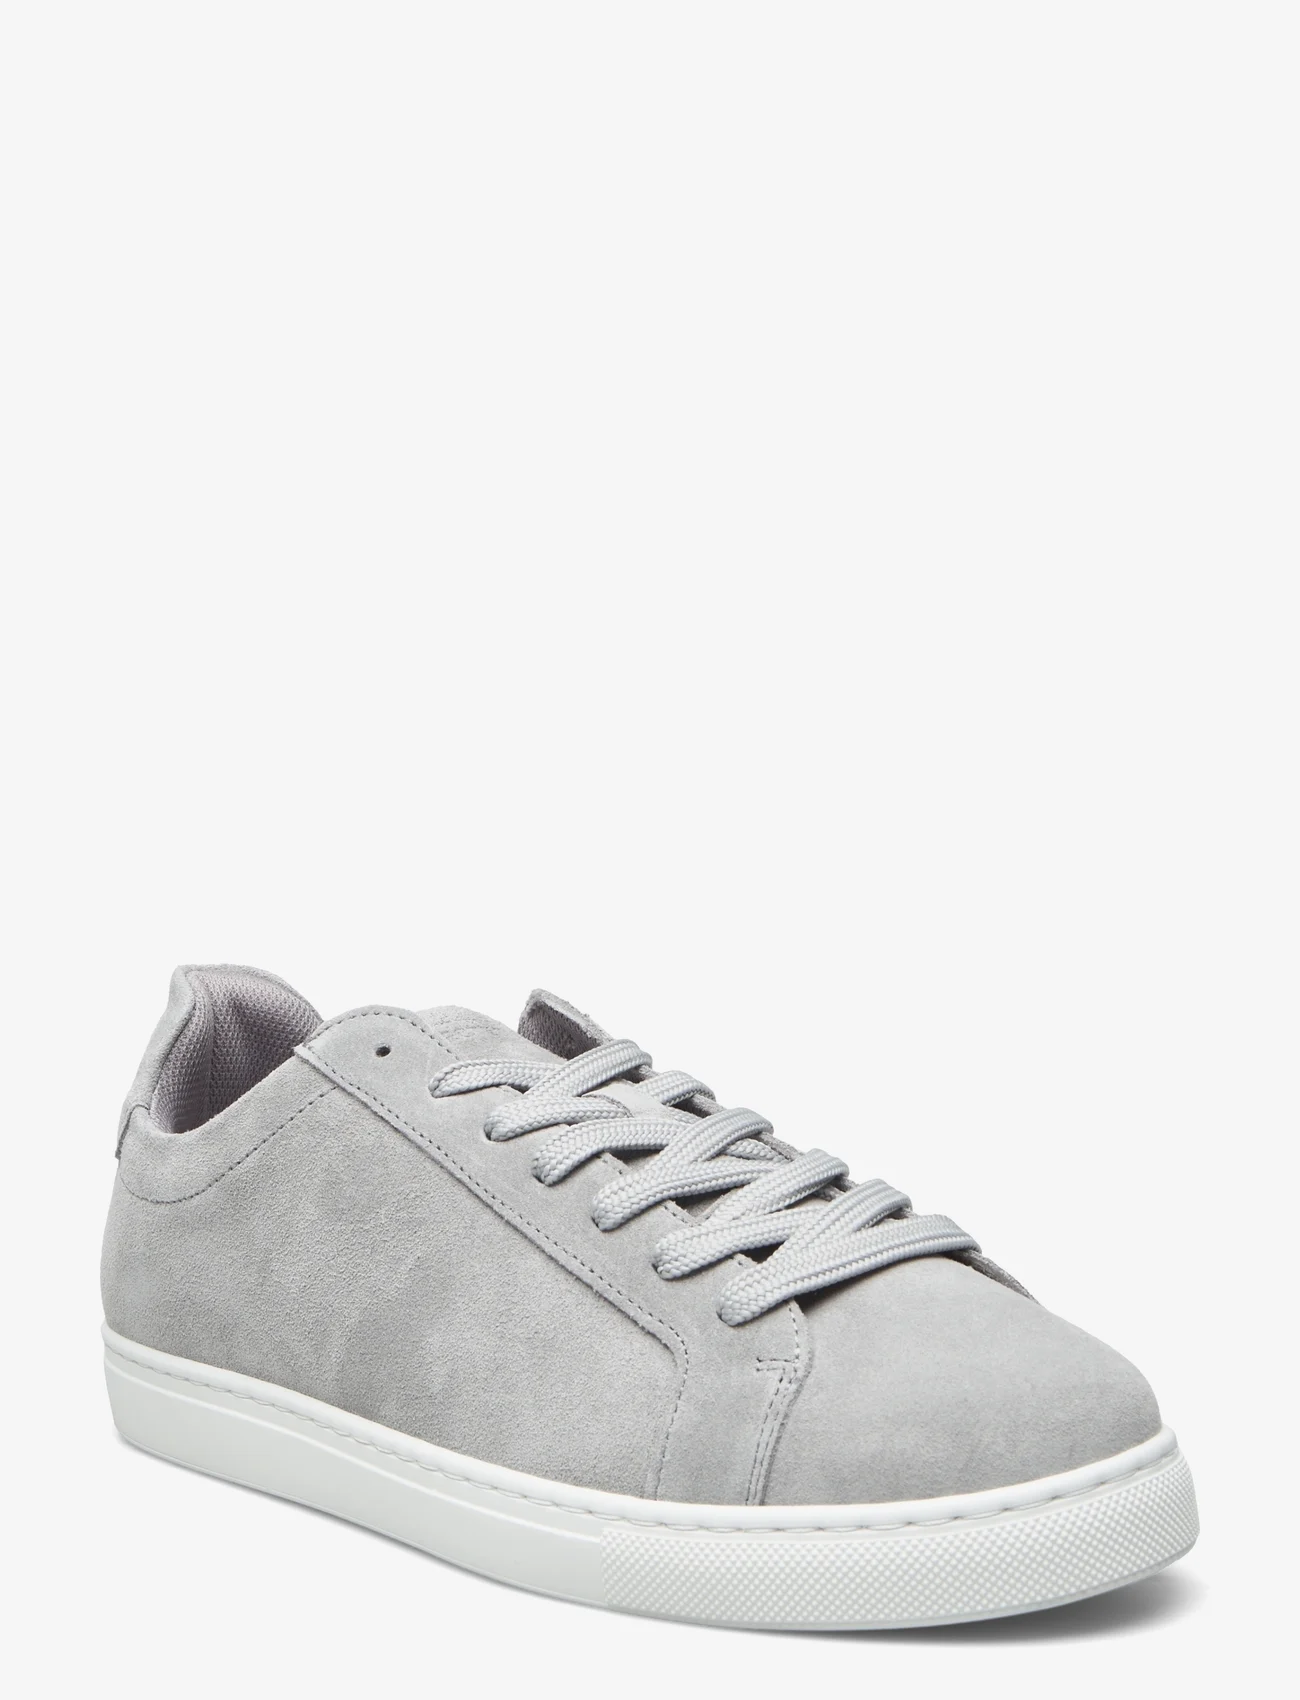 Selected Homme - SLHEVAN NEW SUEDE SNEAKER - lave sneakers - grey - 0